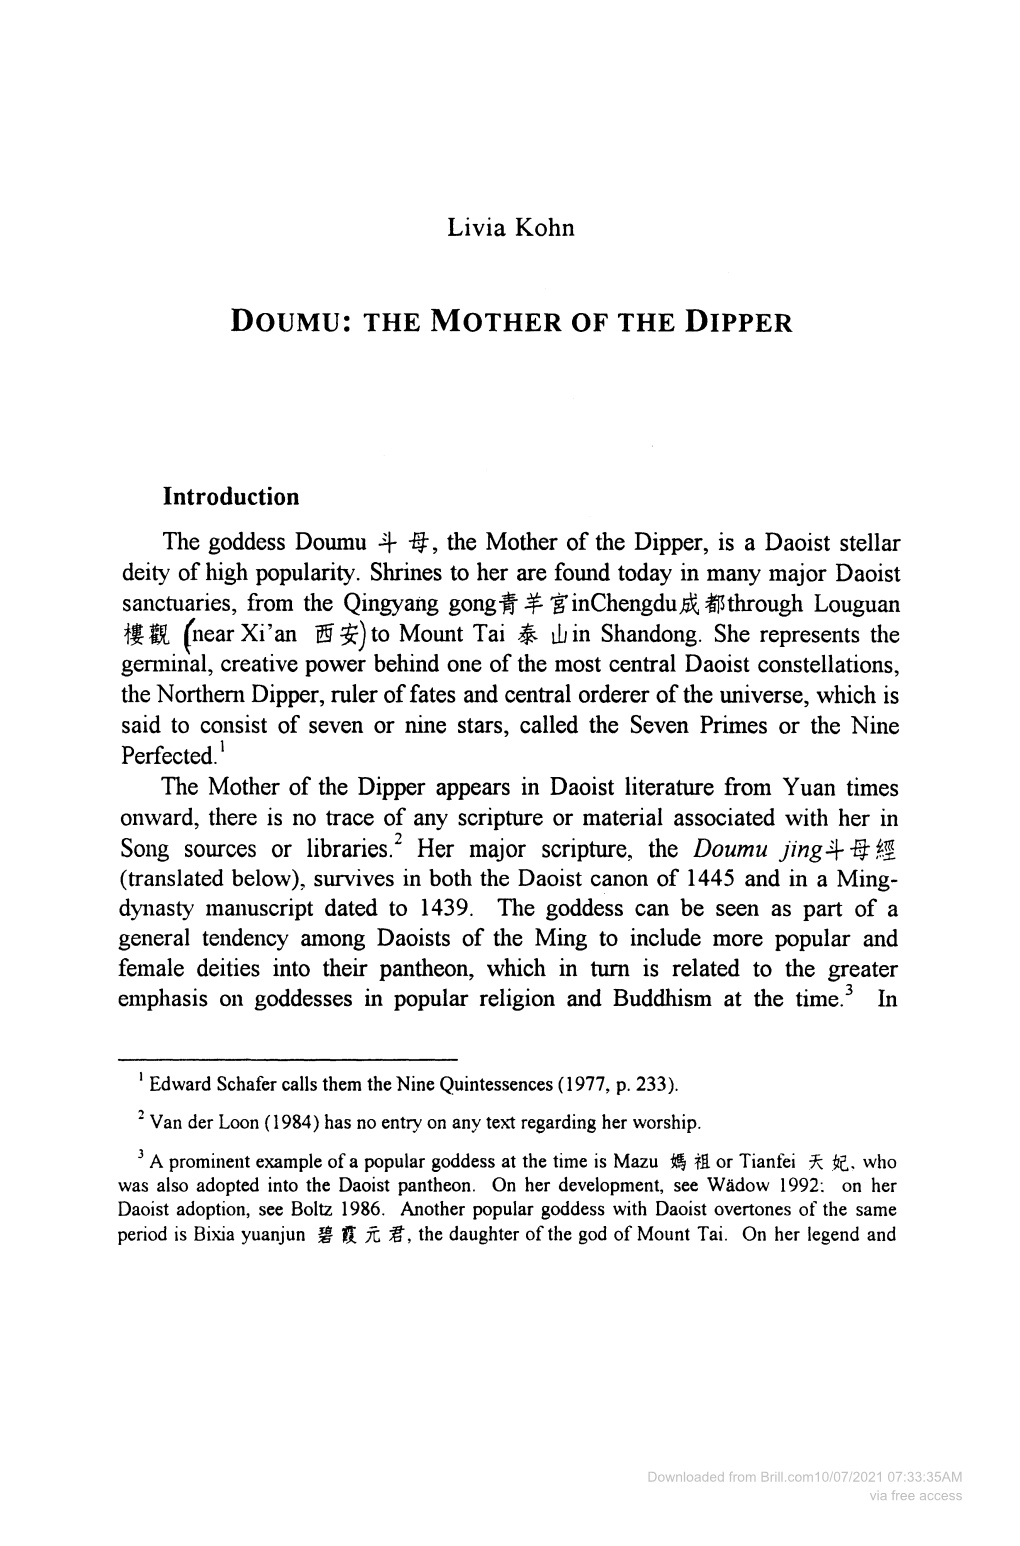 Doumu: the Mother of the Dipper